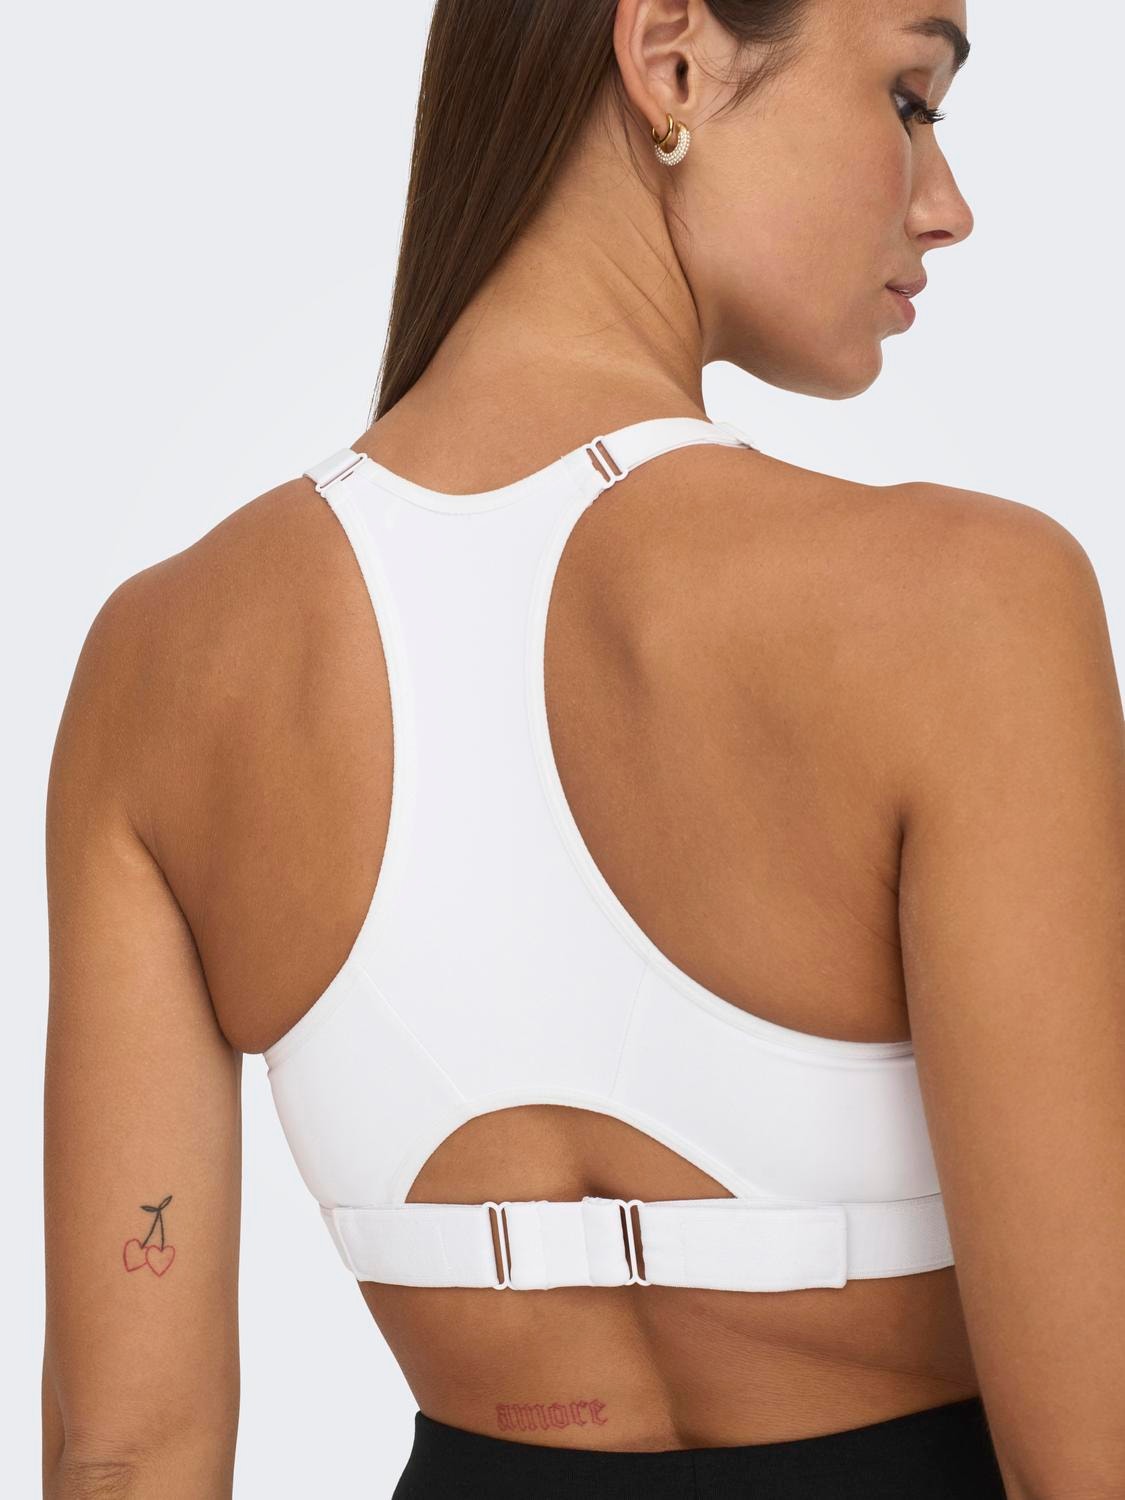 ONLY Adjustable Sports bra with High Support -White - 15281008